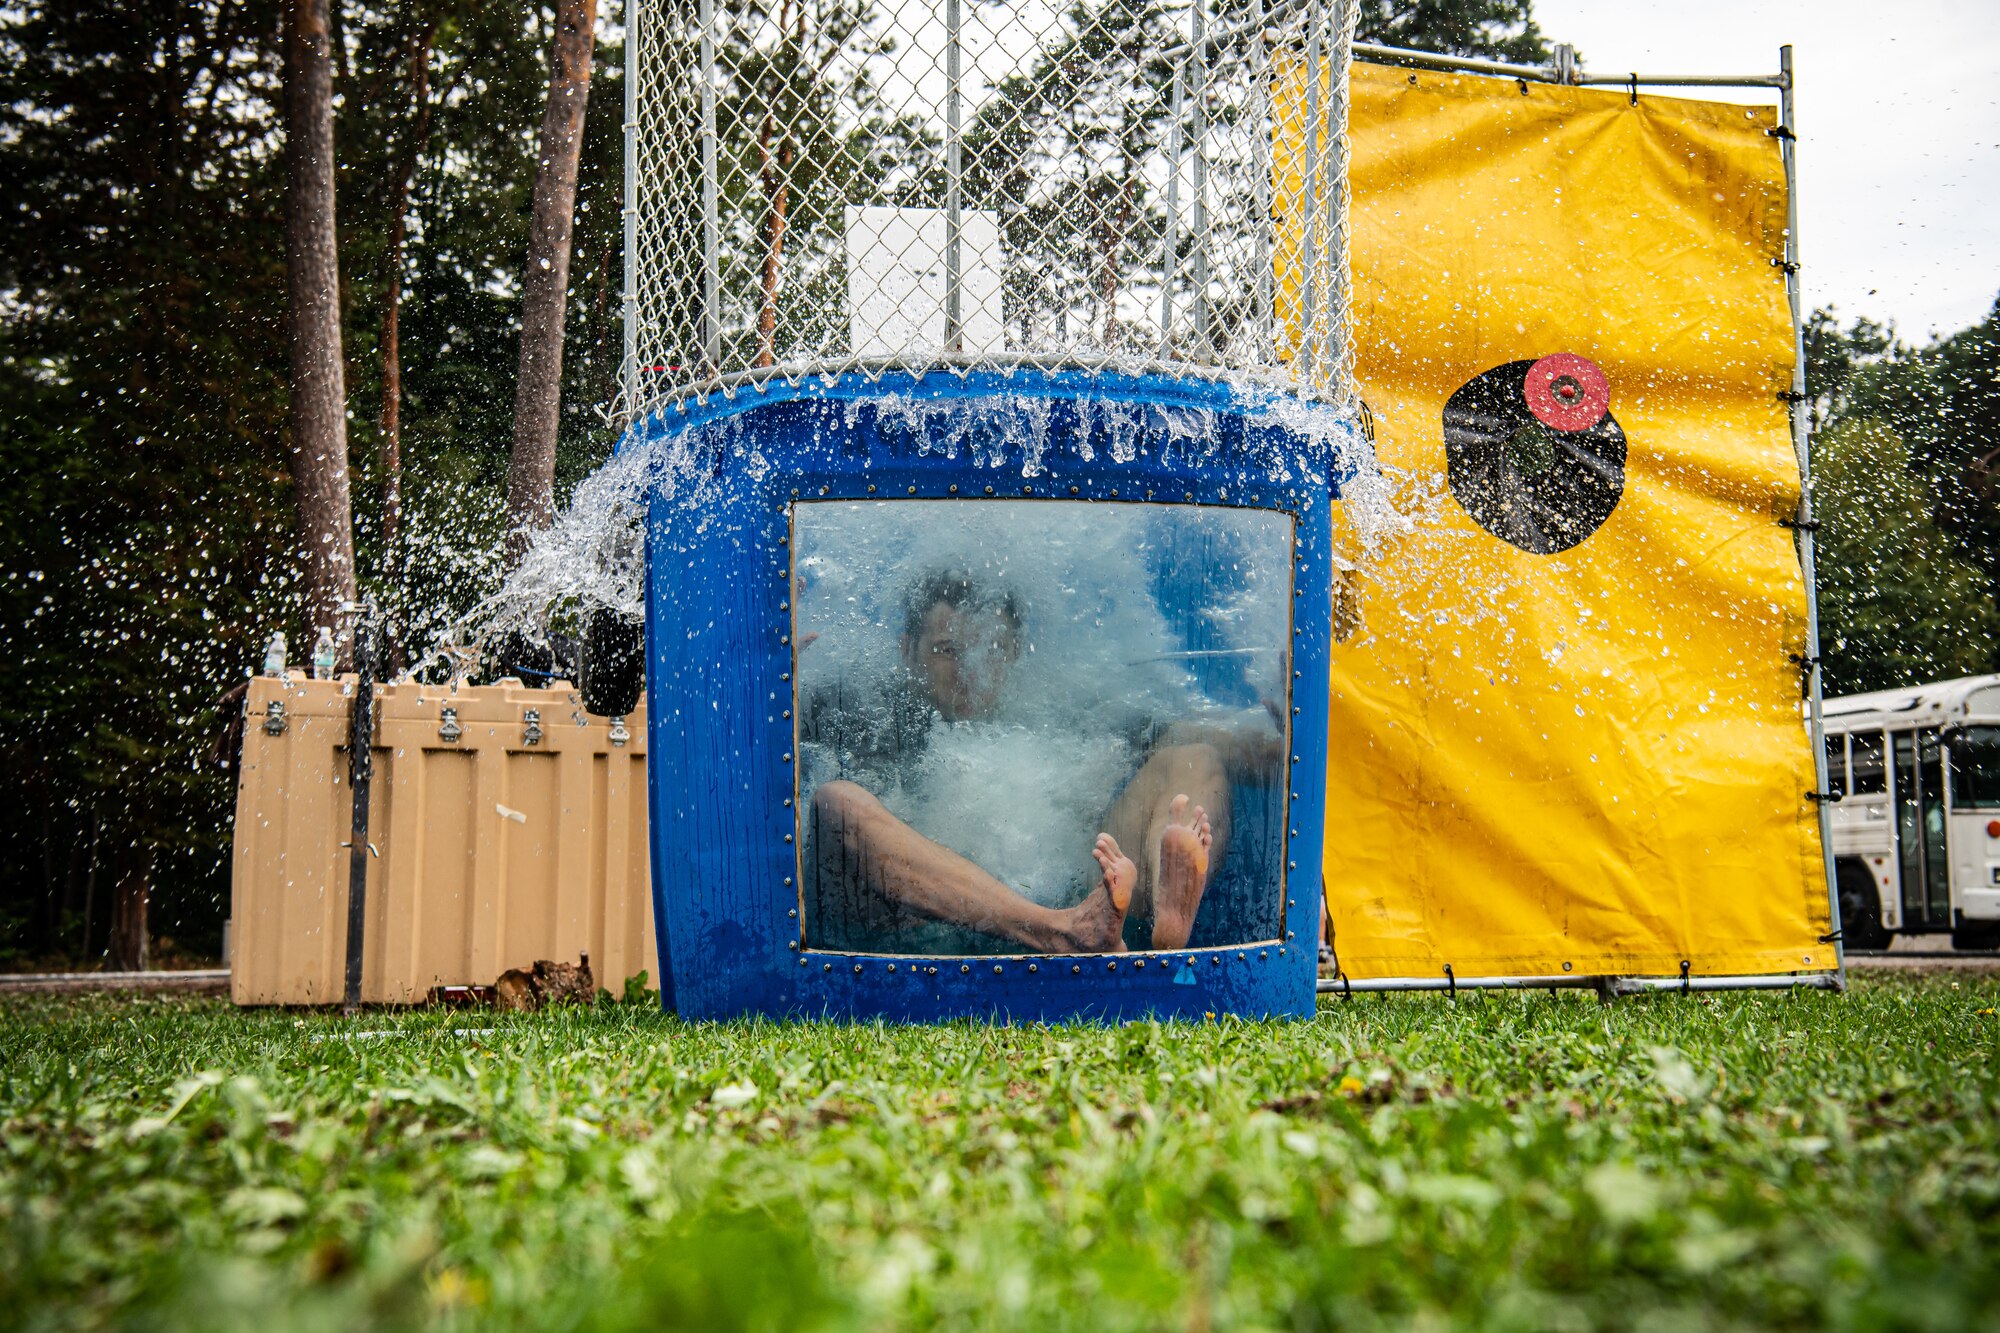 An Airman assigned to the 435th Air Ground Operations Wing falls into the dunk tank during a 435th AGOW Family Fun Event at Ramstein Air Base, Germany, Aug. 18, 2022. The day's activities included a bounce house, a dunk tank and water balloons. (U.S. Air Force photo by Airman 1st Class Jared Lovett)